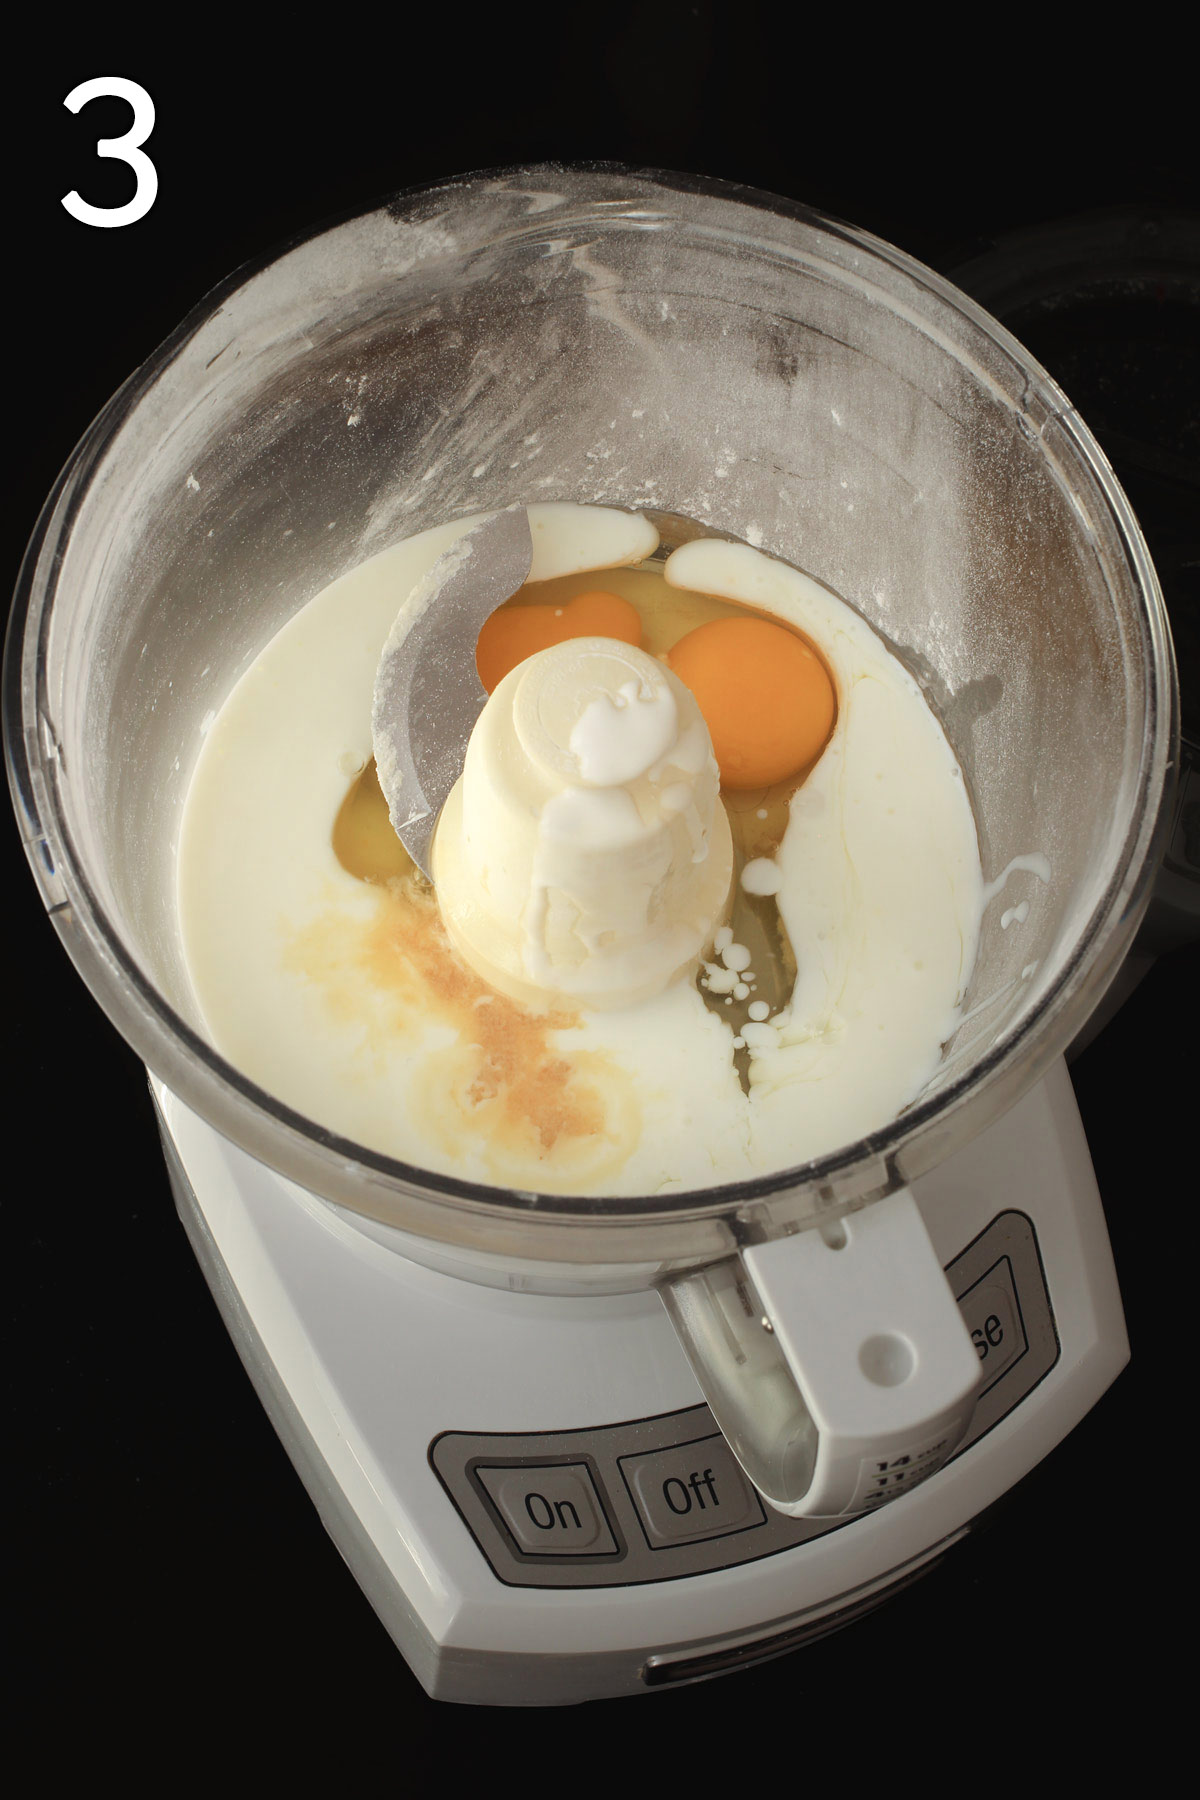 eggs, buttermilk, and vanilla extract in the food processor bowl.